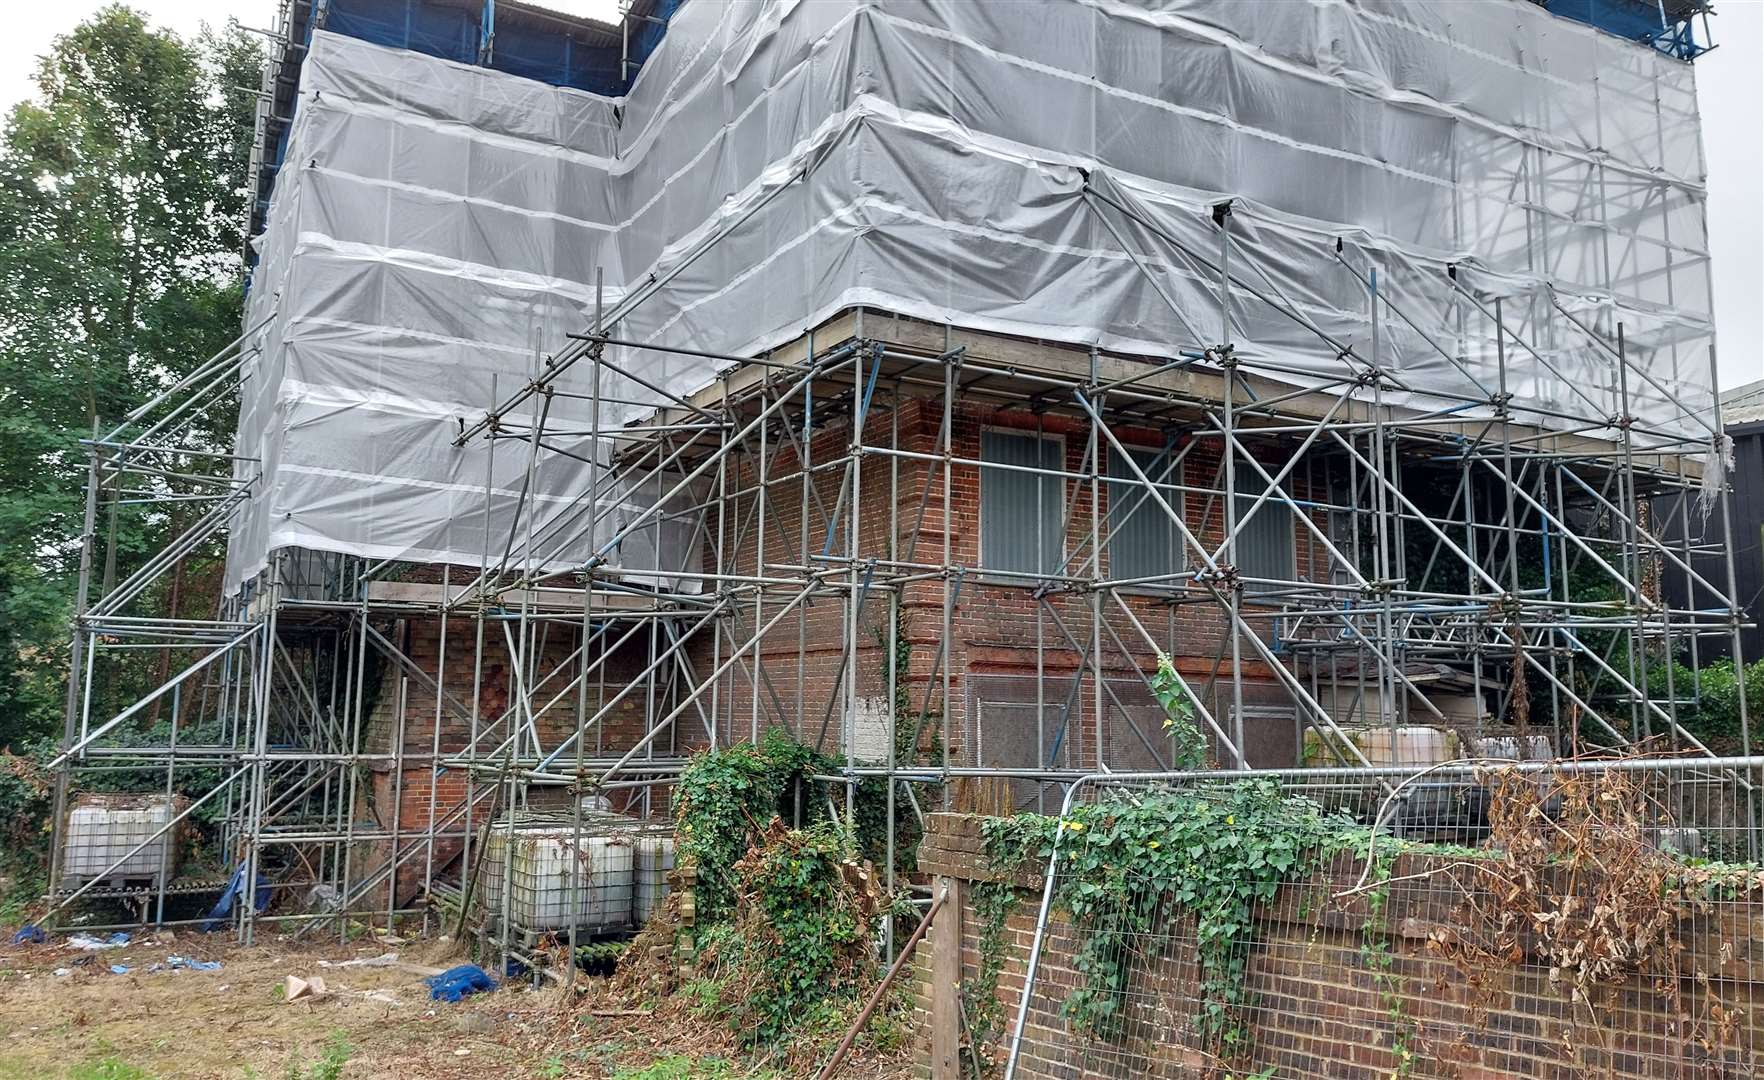 The Grade II*-listed Whist House is covered in scaffolding